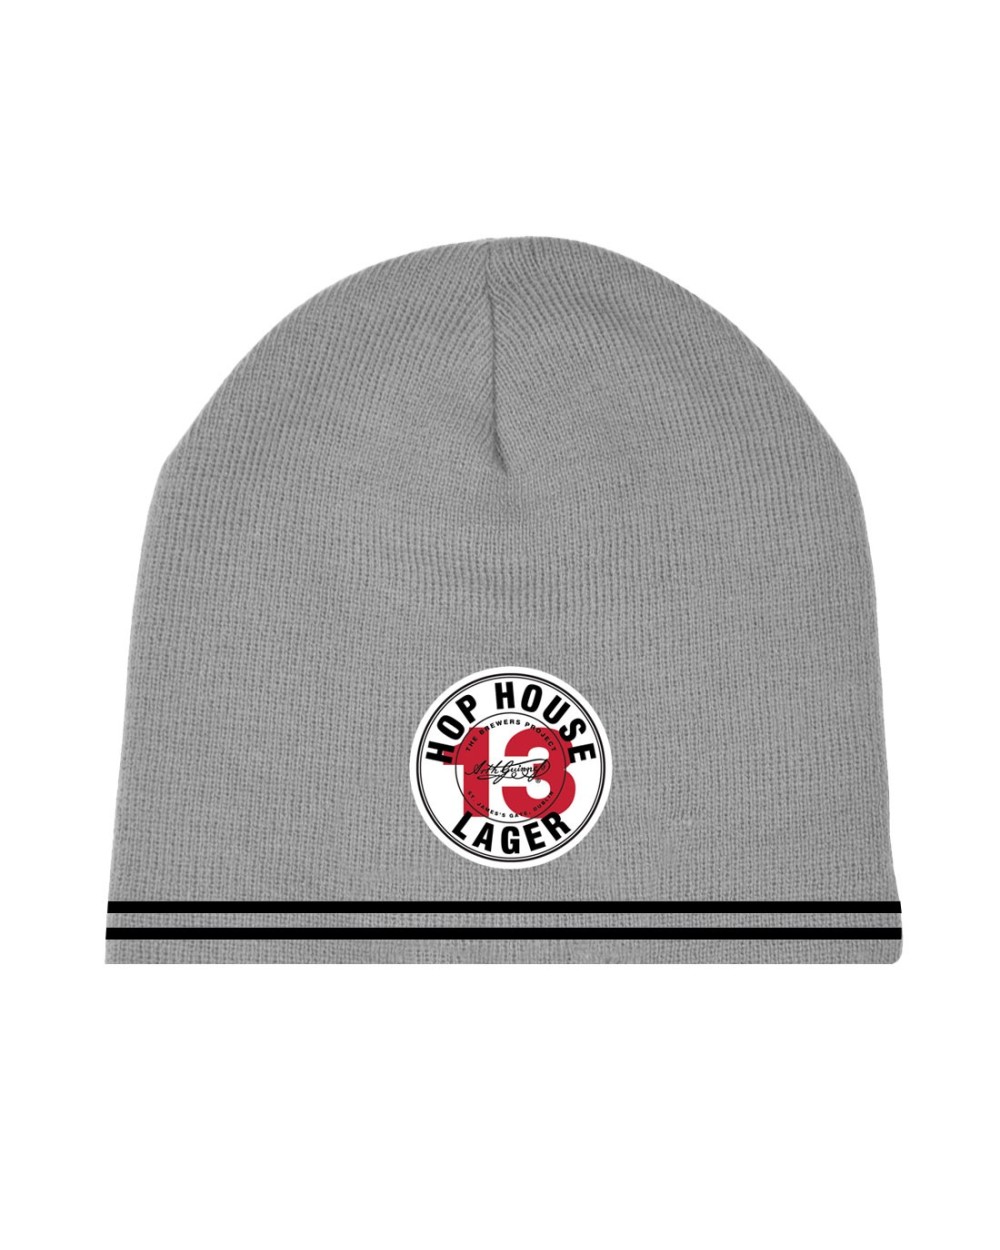 Hop House 13  Grey knit hat with badge